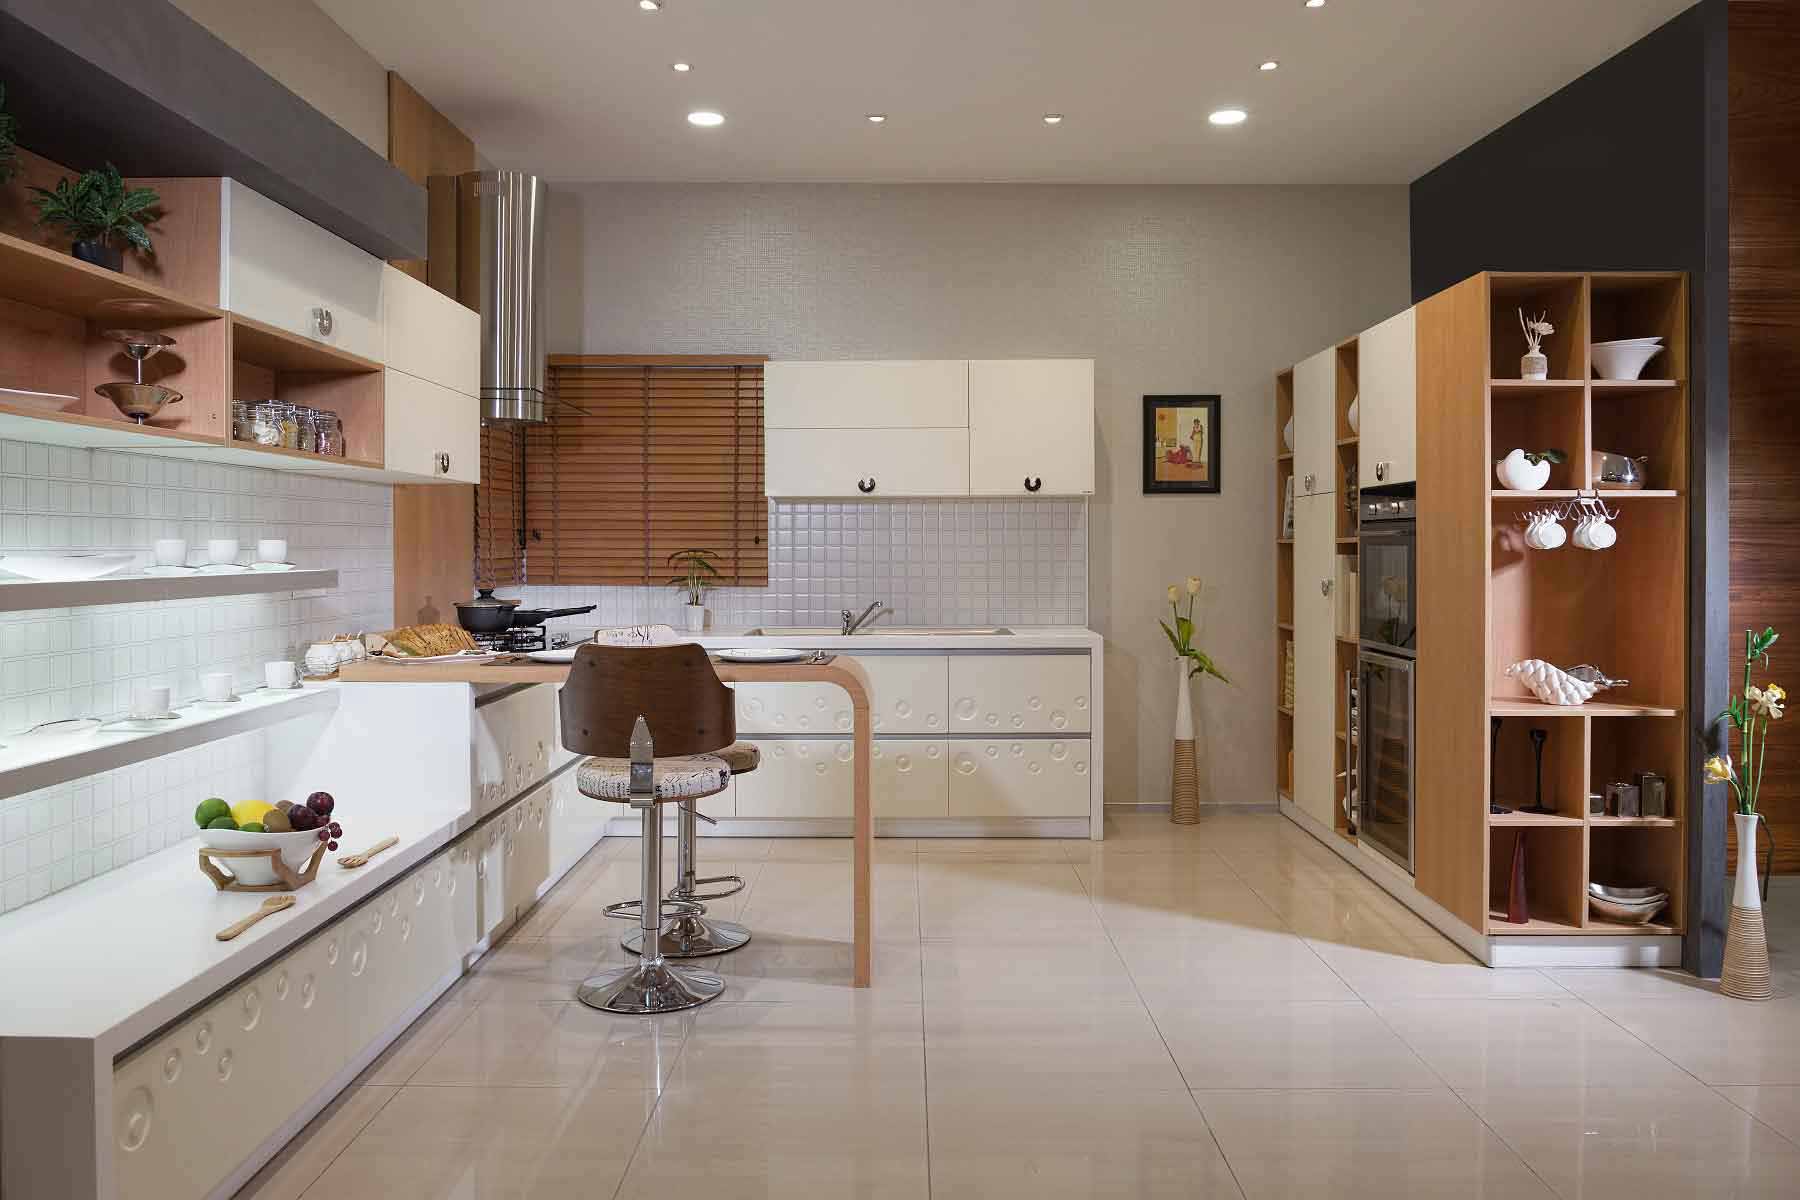 modular kitchen with island and storage with dining, this is an beautiful polished modular kitchen made in noida and delhi